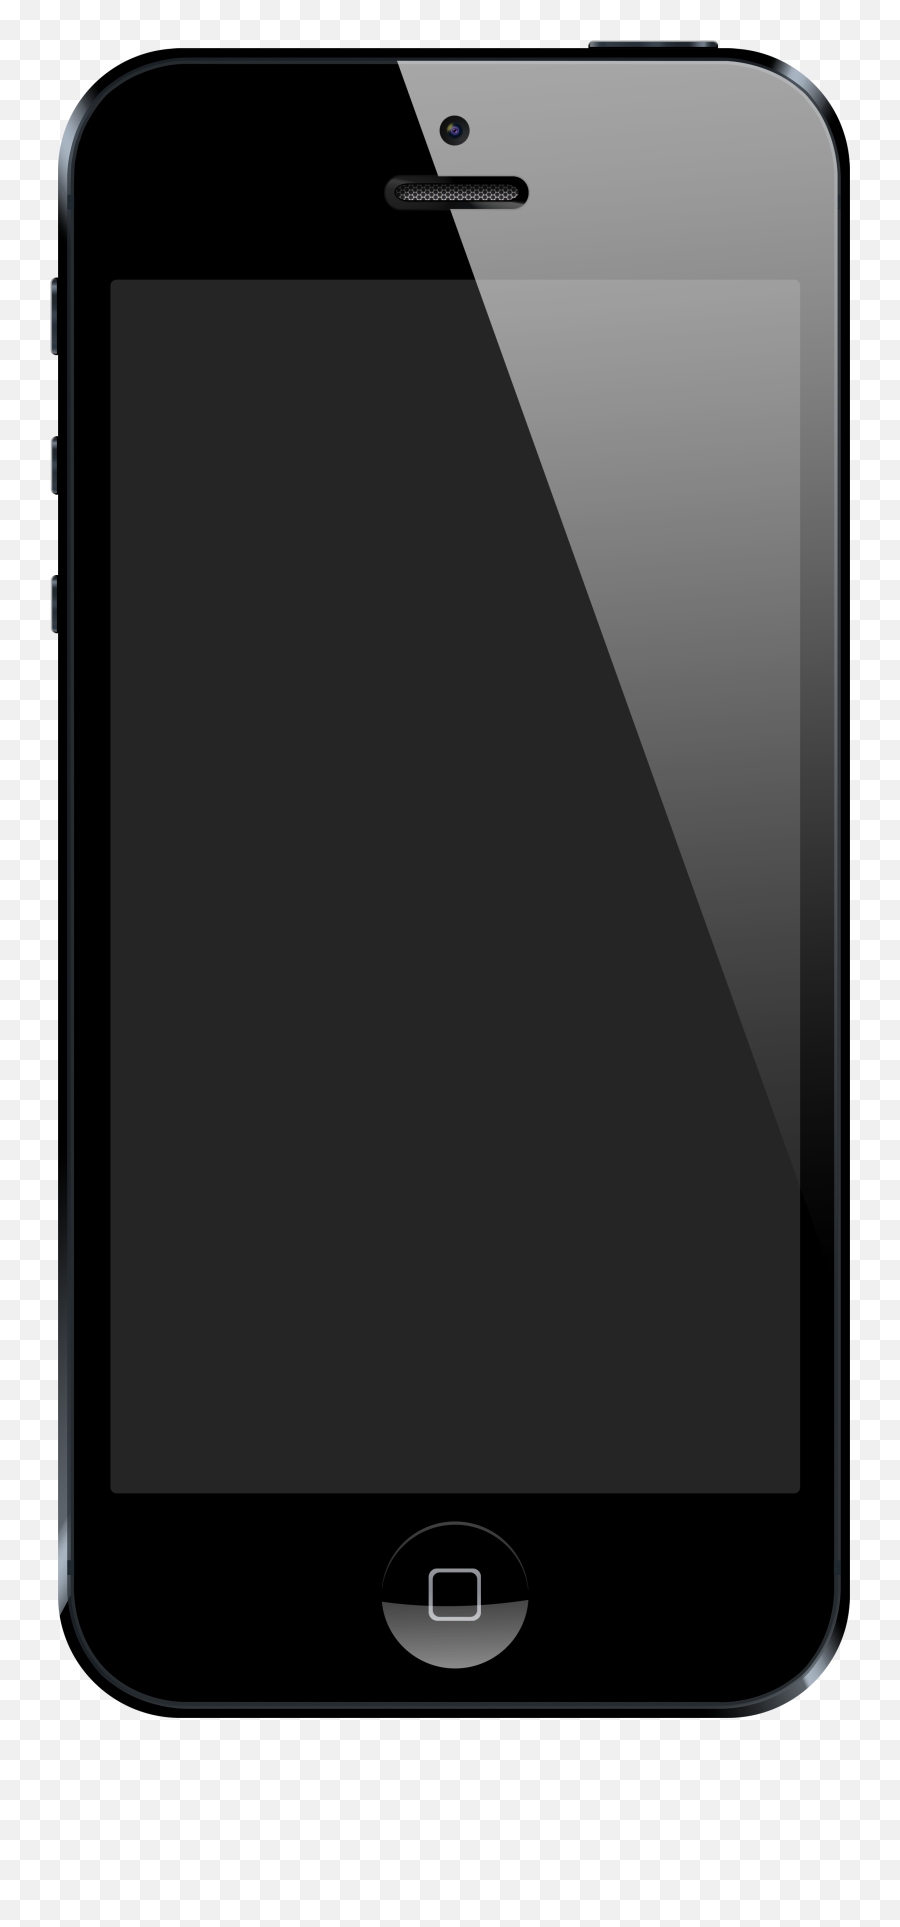 Iphone 5 Template Transparent Png - Phones With A Black Screen,Iphone Png Template